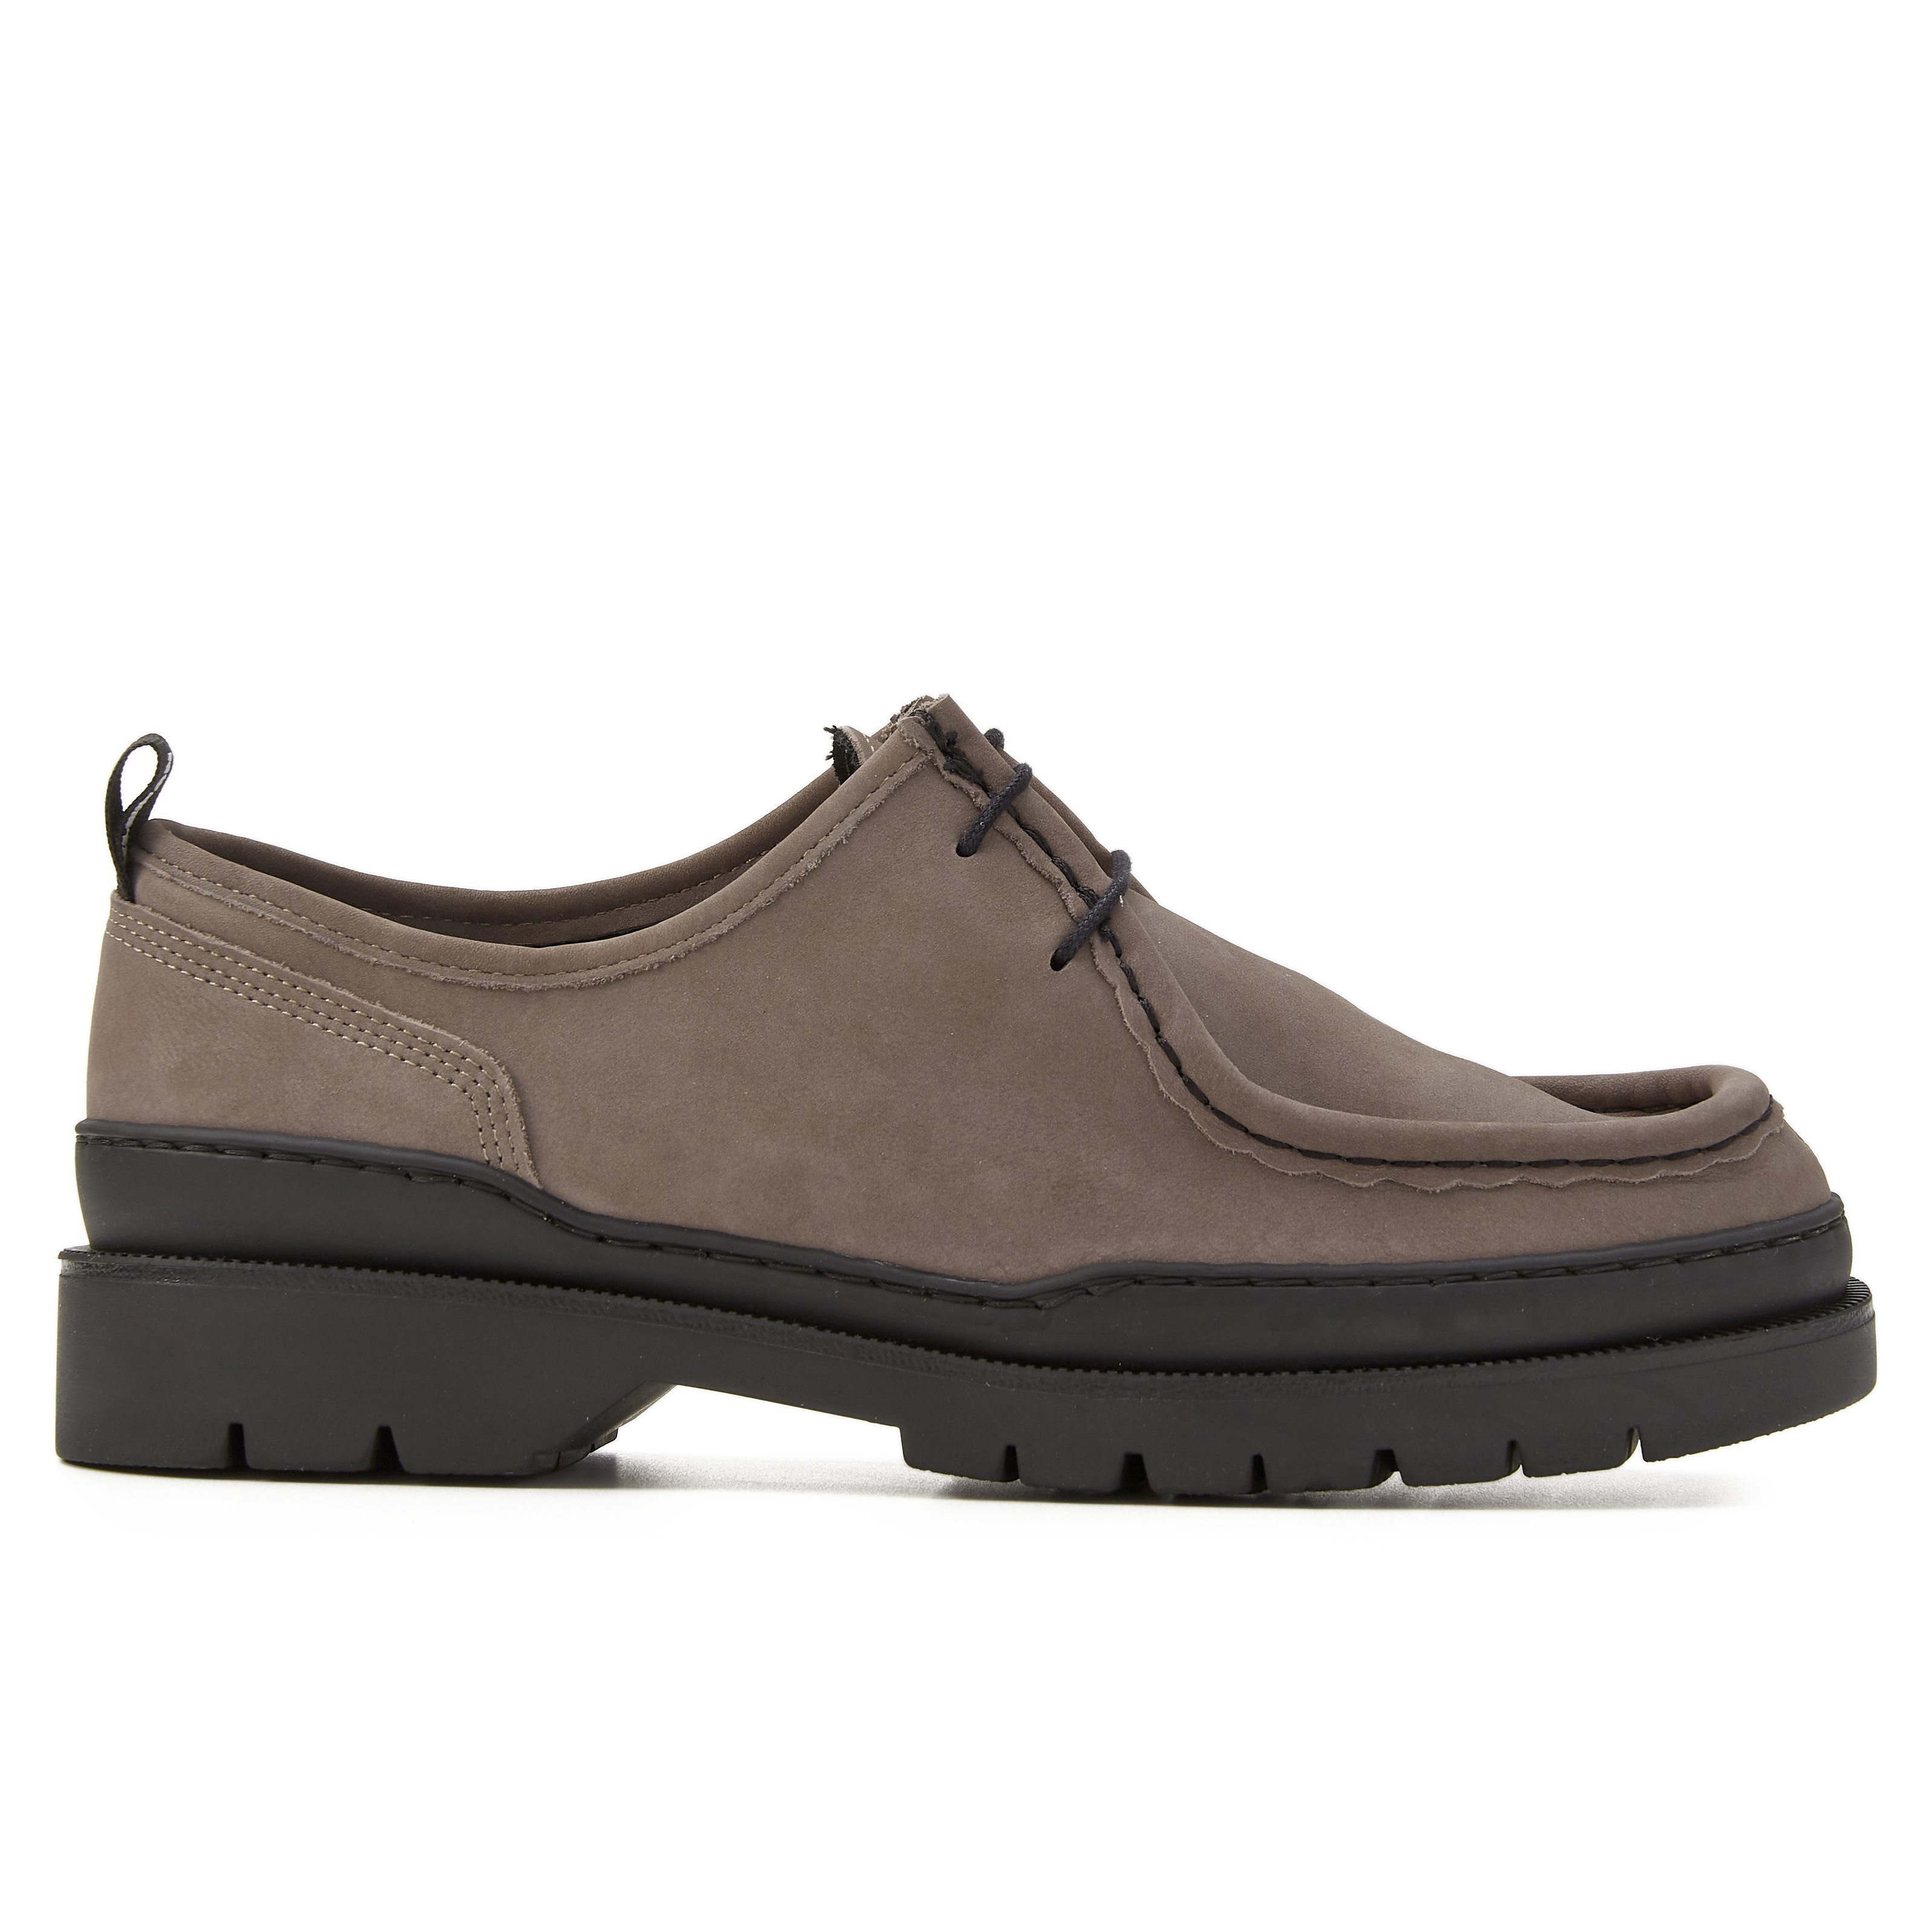 Major All Weather Leather Shoe